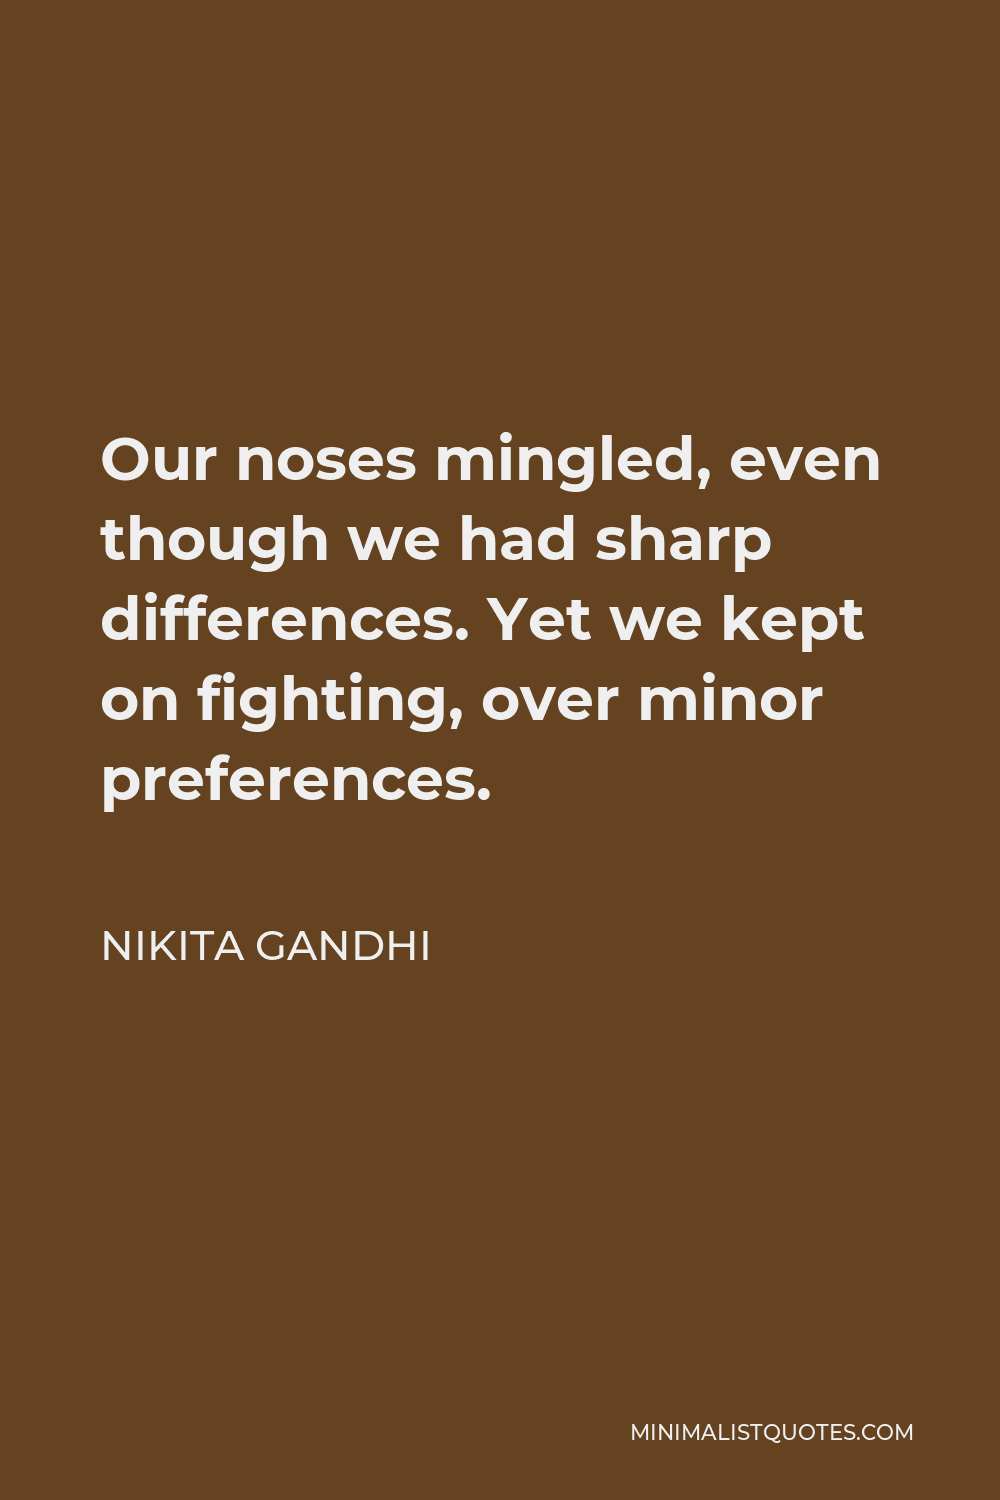 Nikita Gandhi Quote - Our noses mingled, even though we had sharp differences. Yet we kept on fighting, over minor preferences.